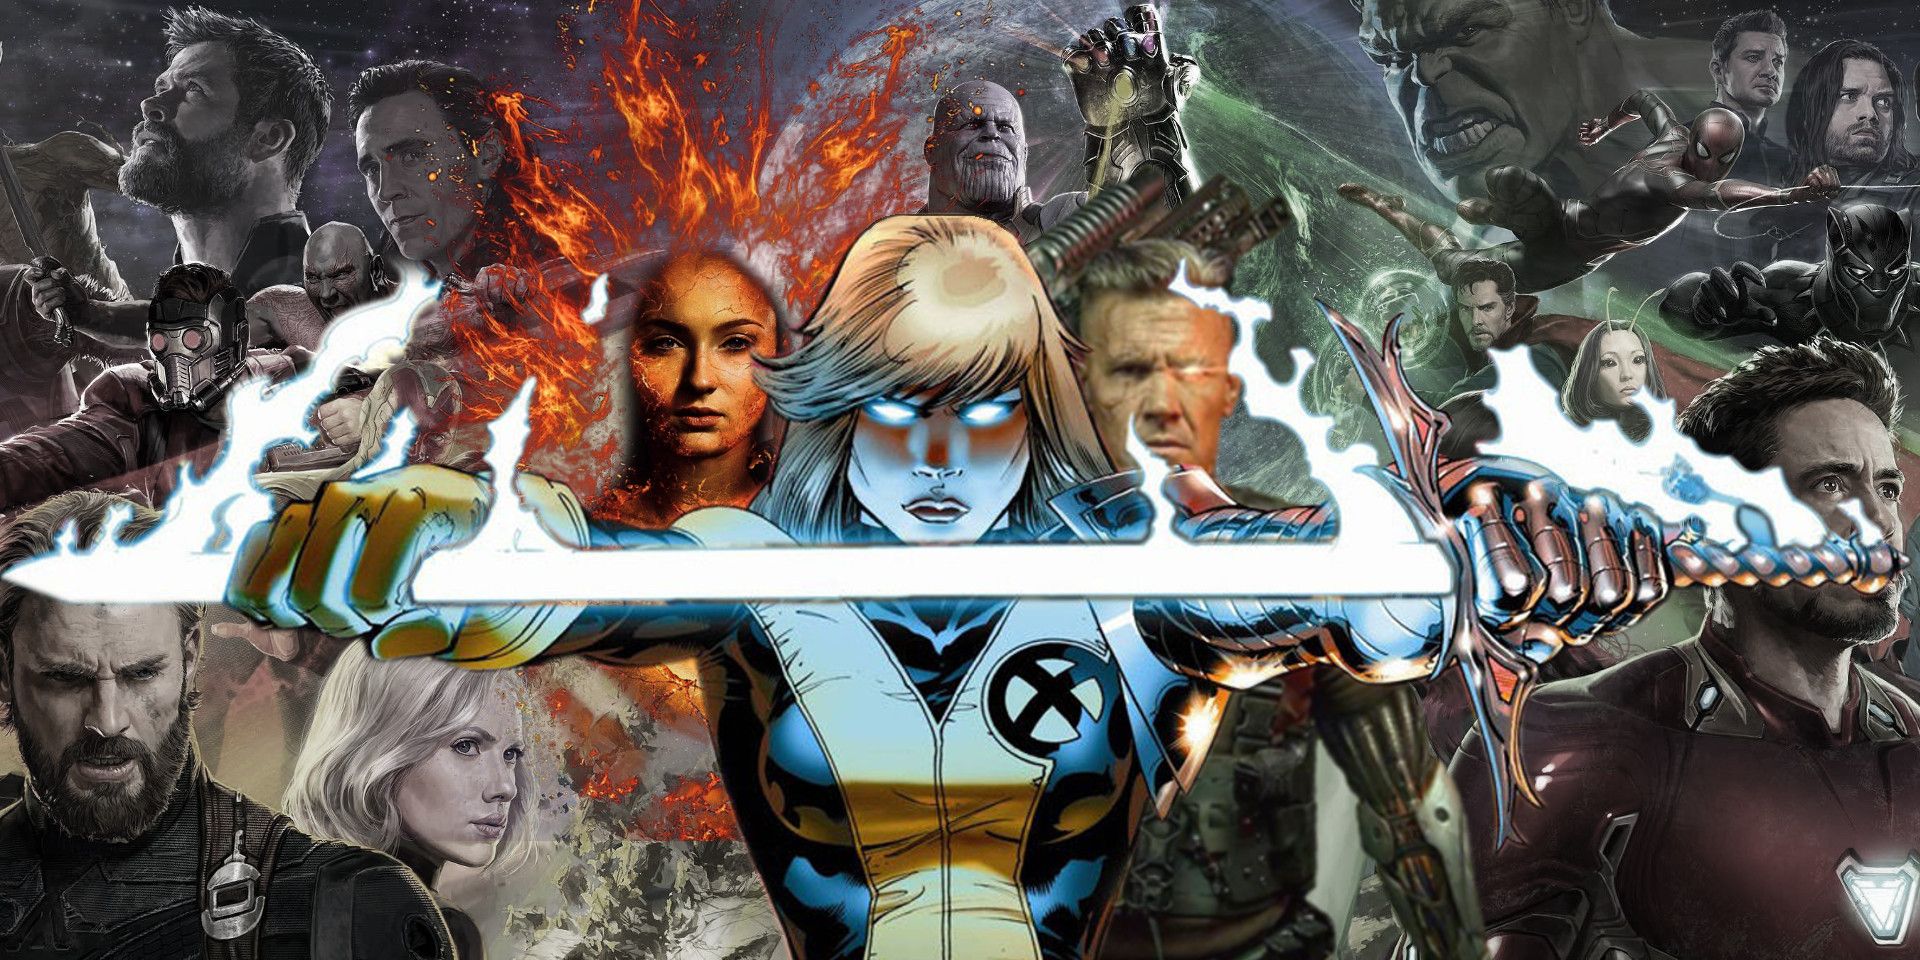 The New Mutants' could use Magik's dimension-hopping powers to introduce  mutants into the MCU